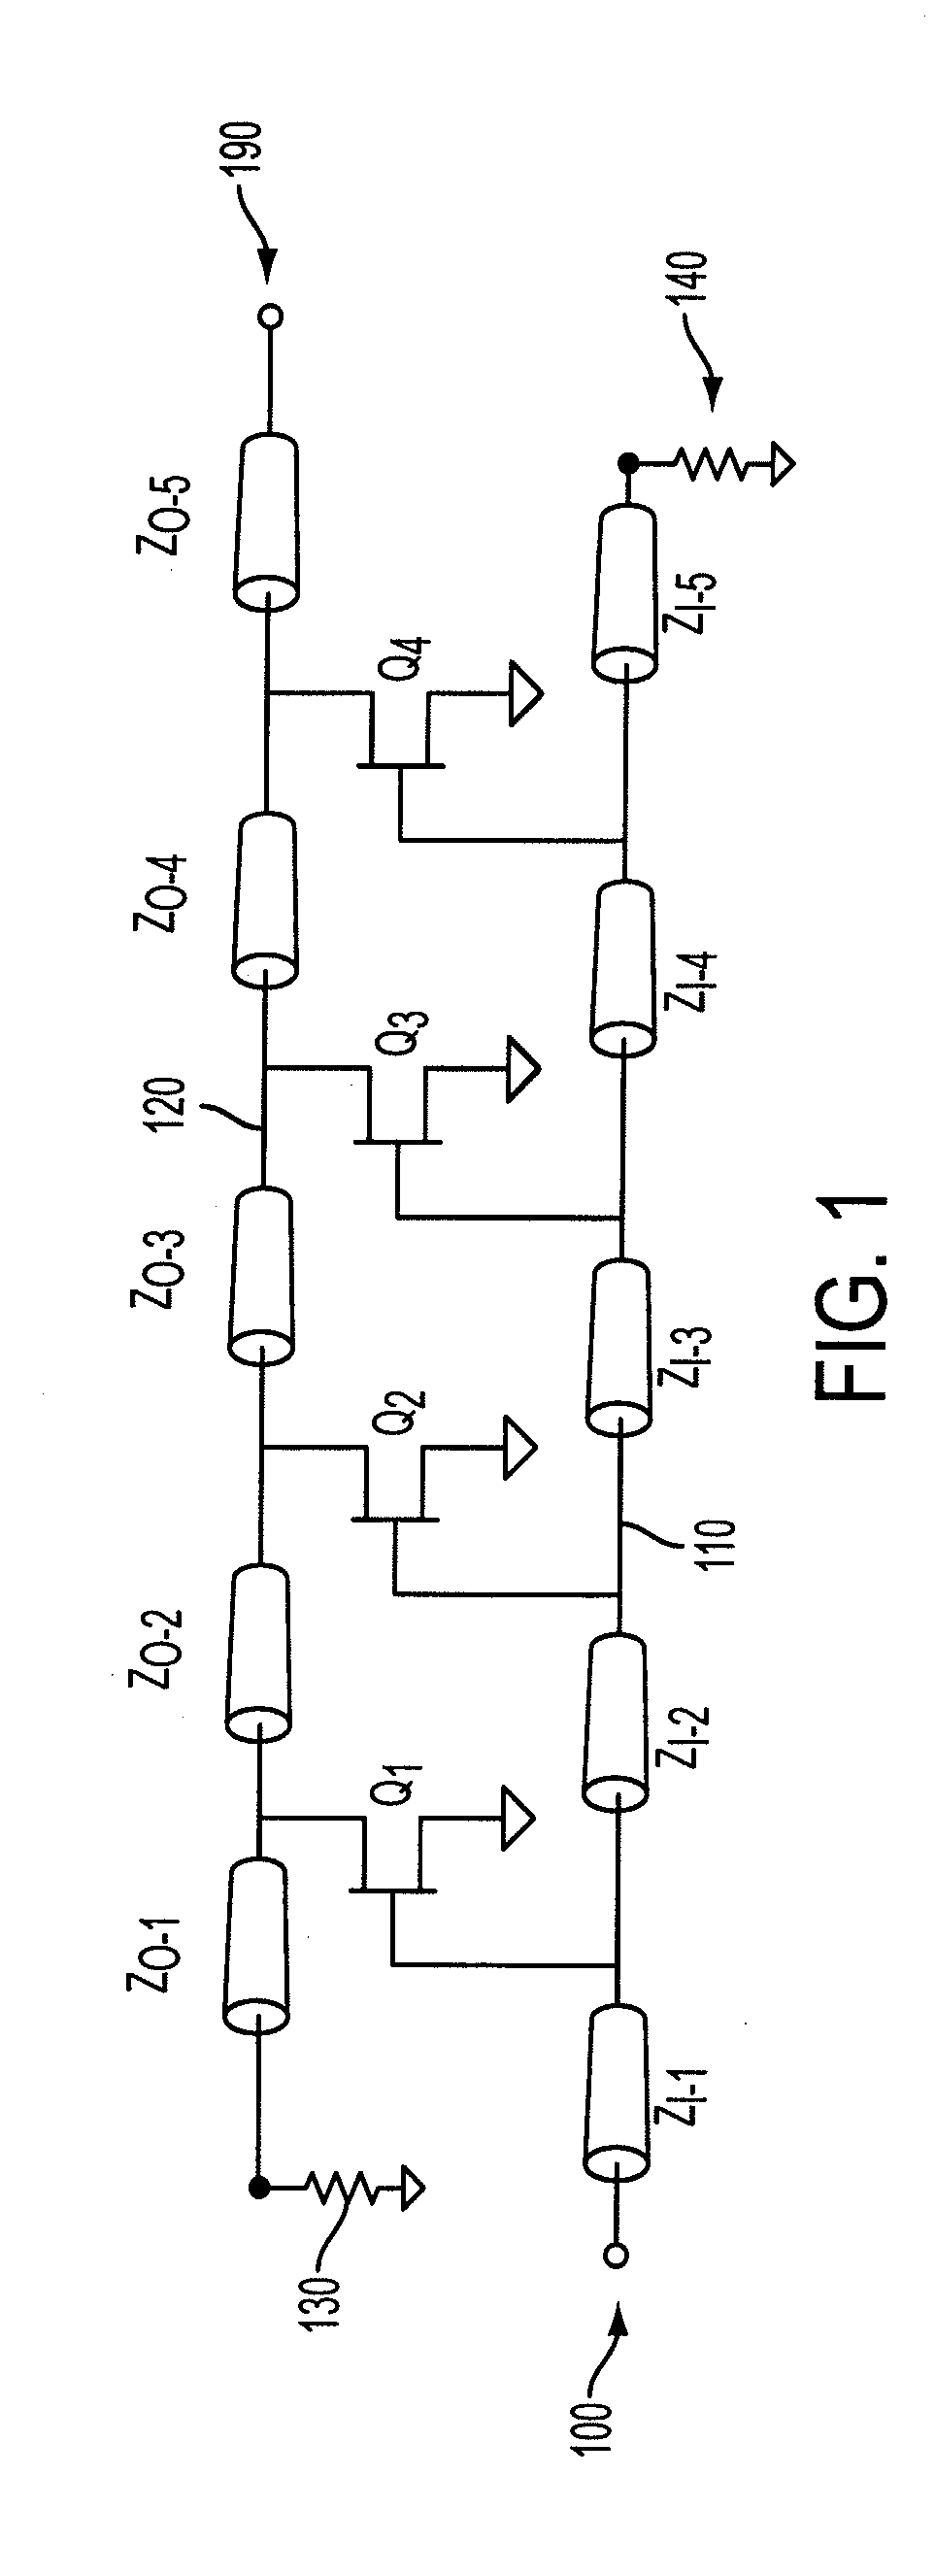 Method and apparatus for josephson distributed output amplifier